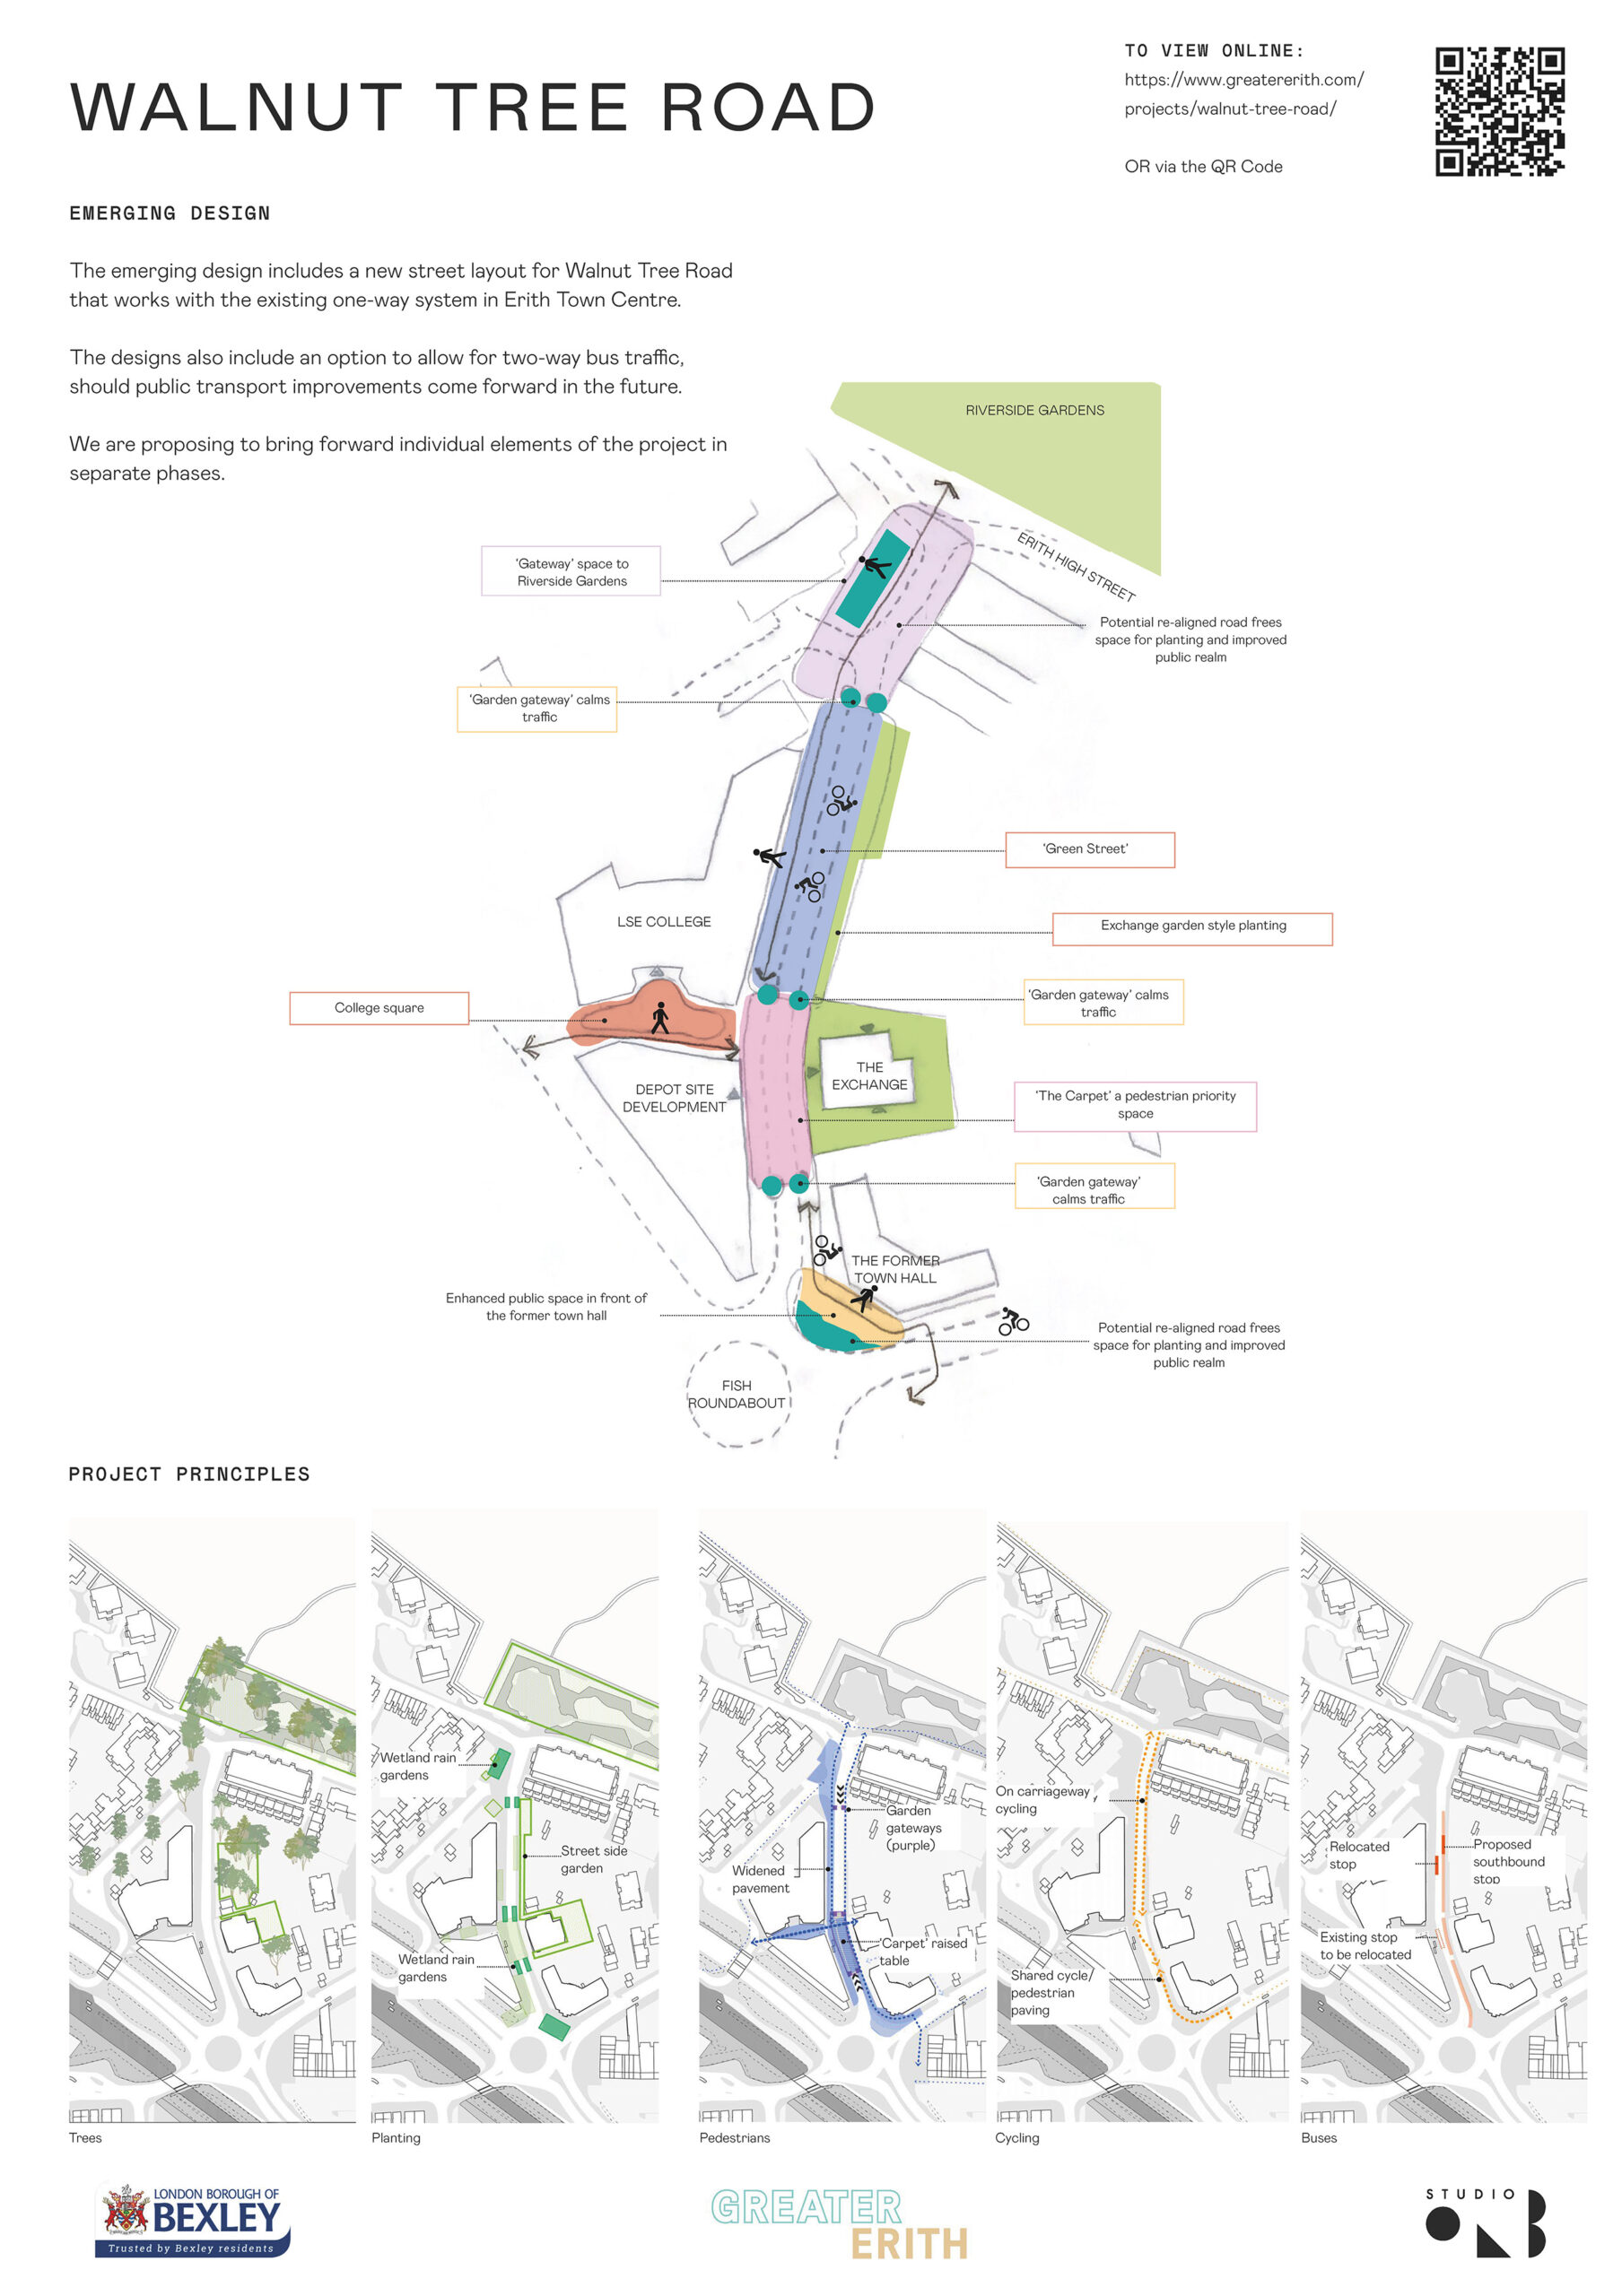 Drawing of emerging design for Walnut Tree Road with smaller diagrams describing the project principles